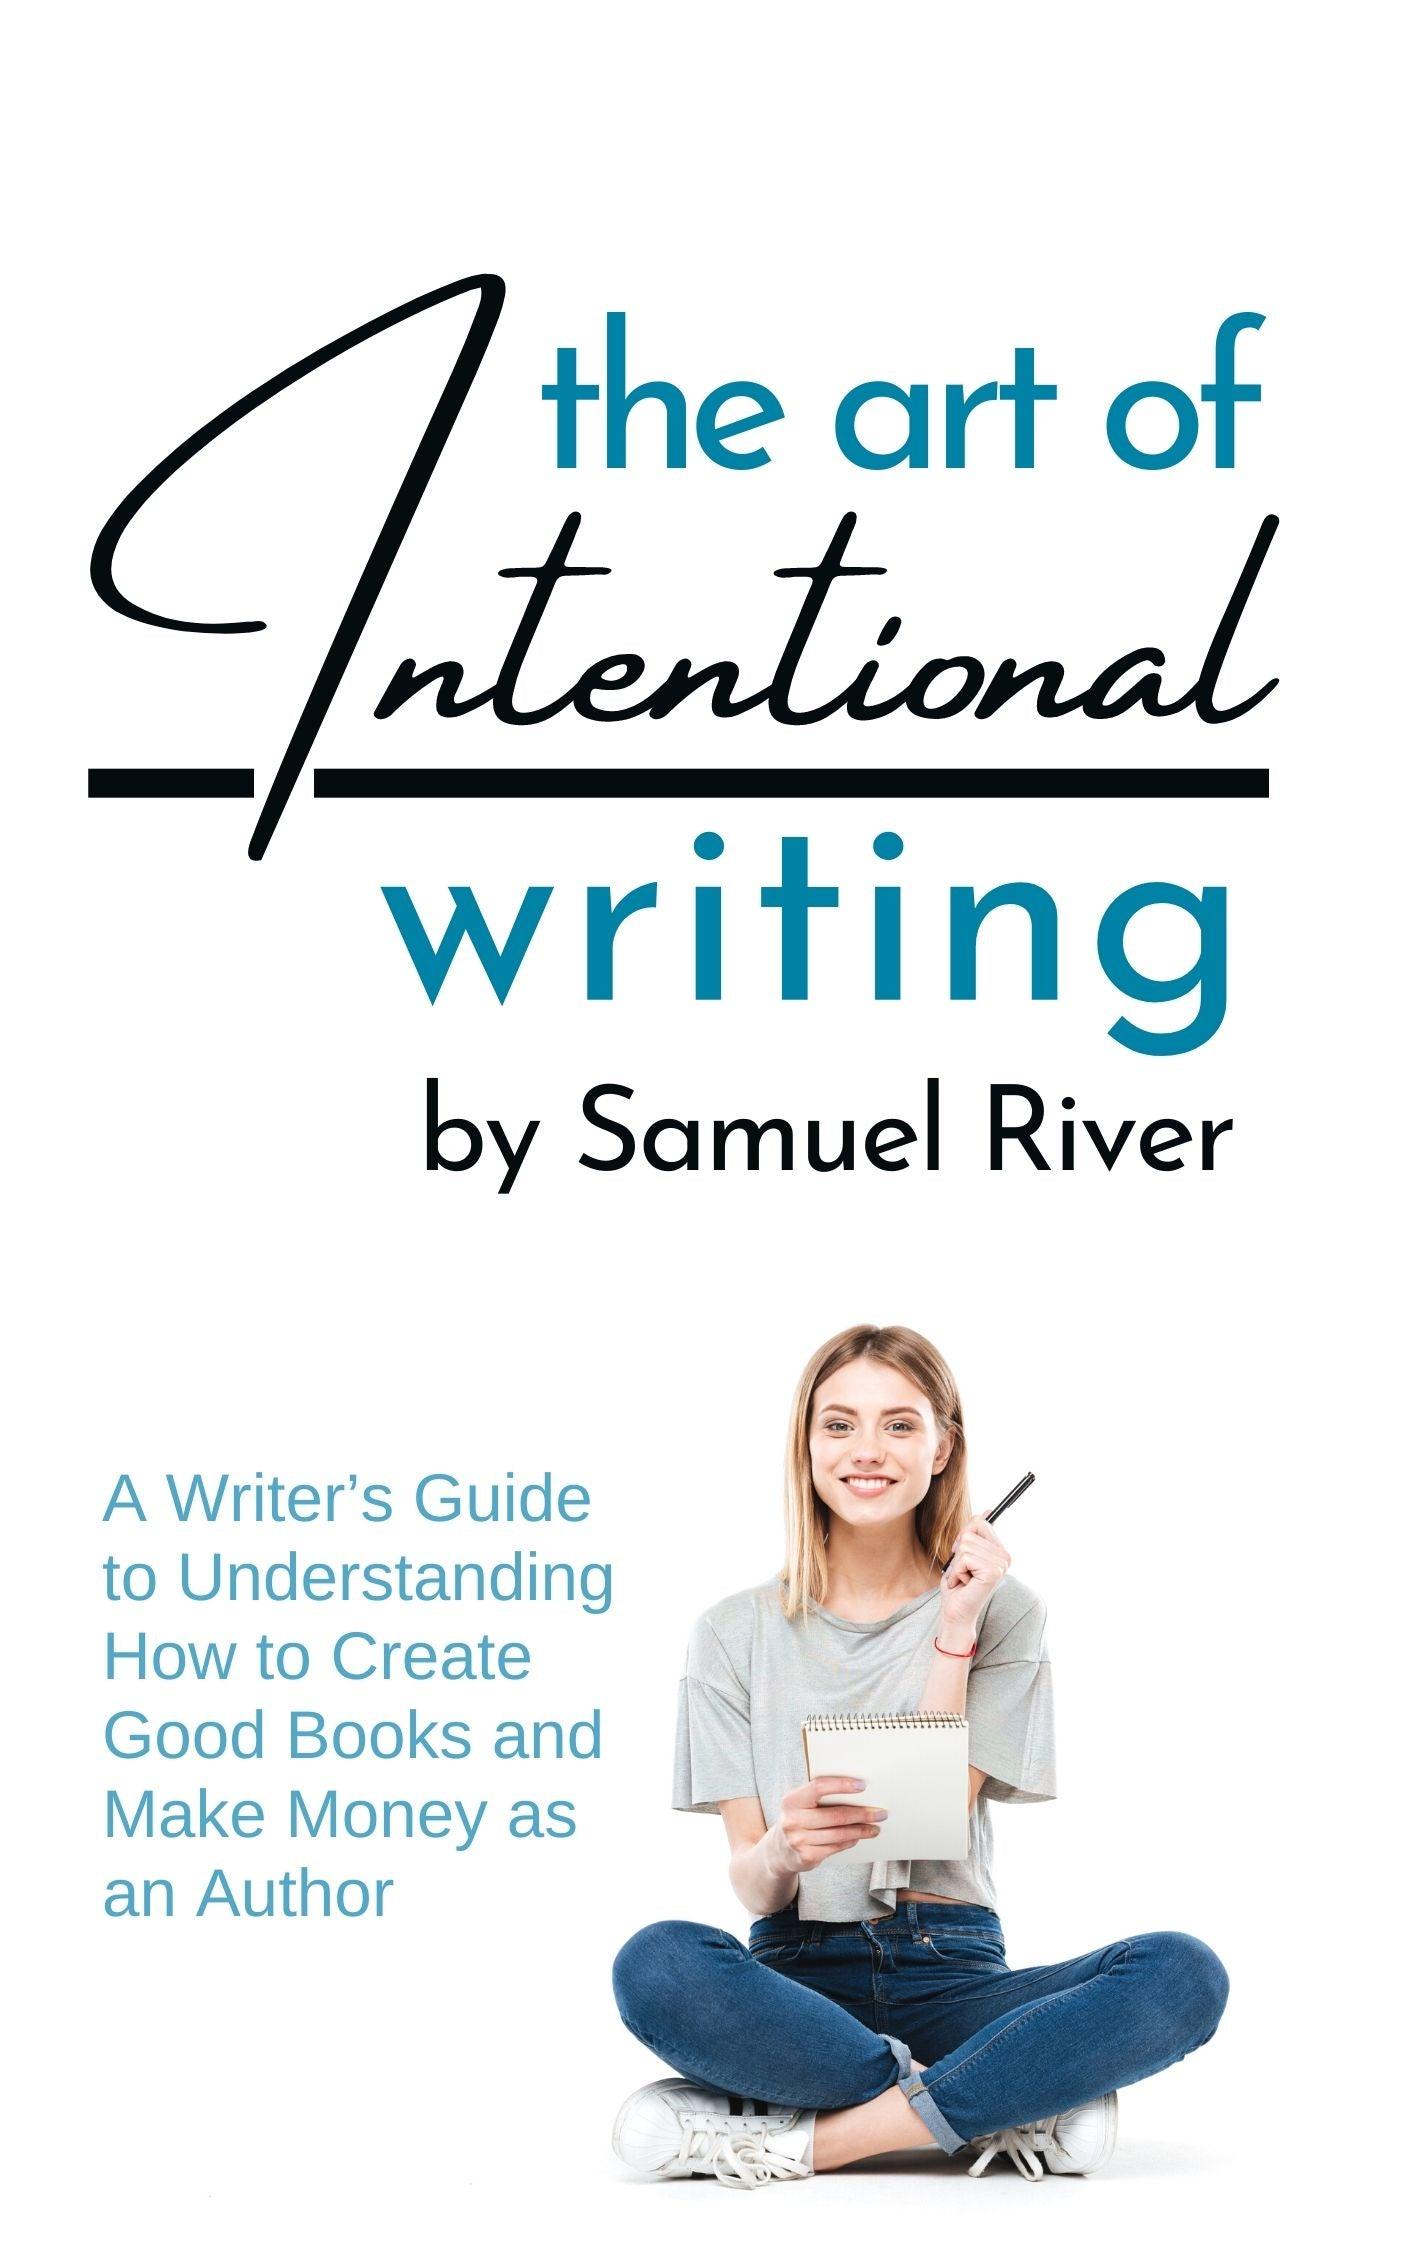 The Art of Intentional Writing - 22 Lions